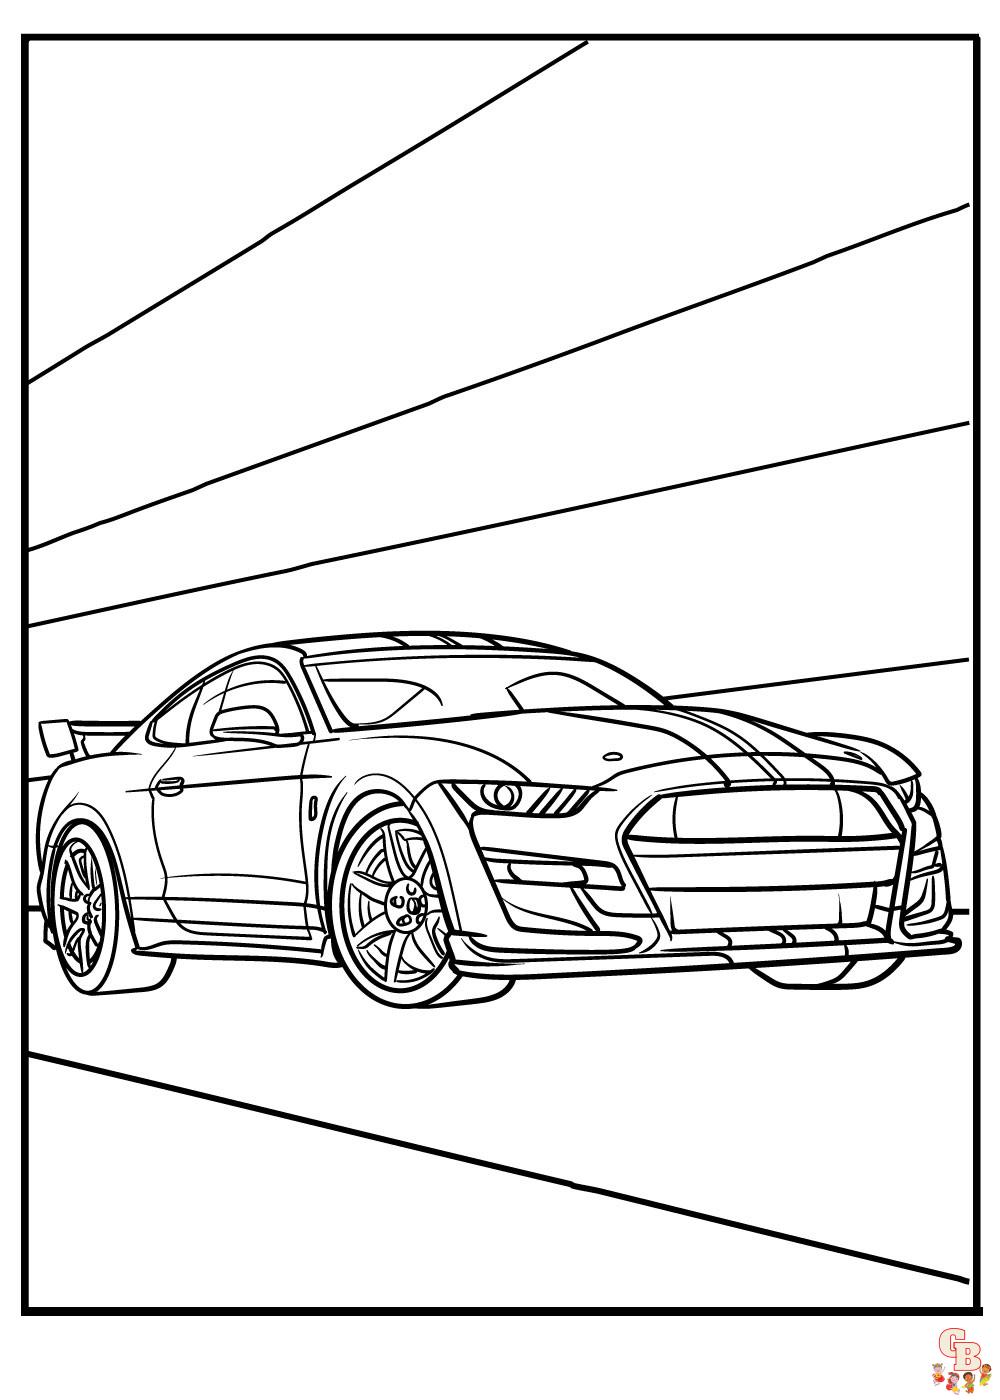 Supercars Coloring Pages 6